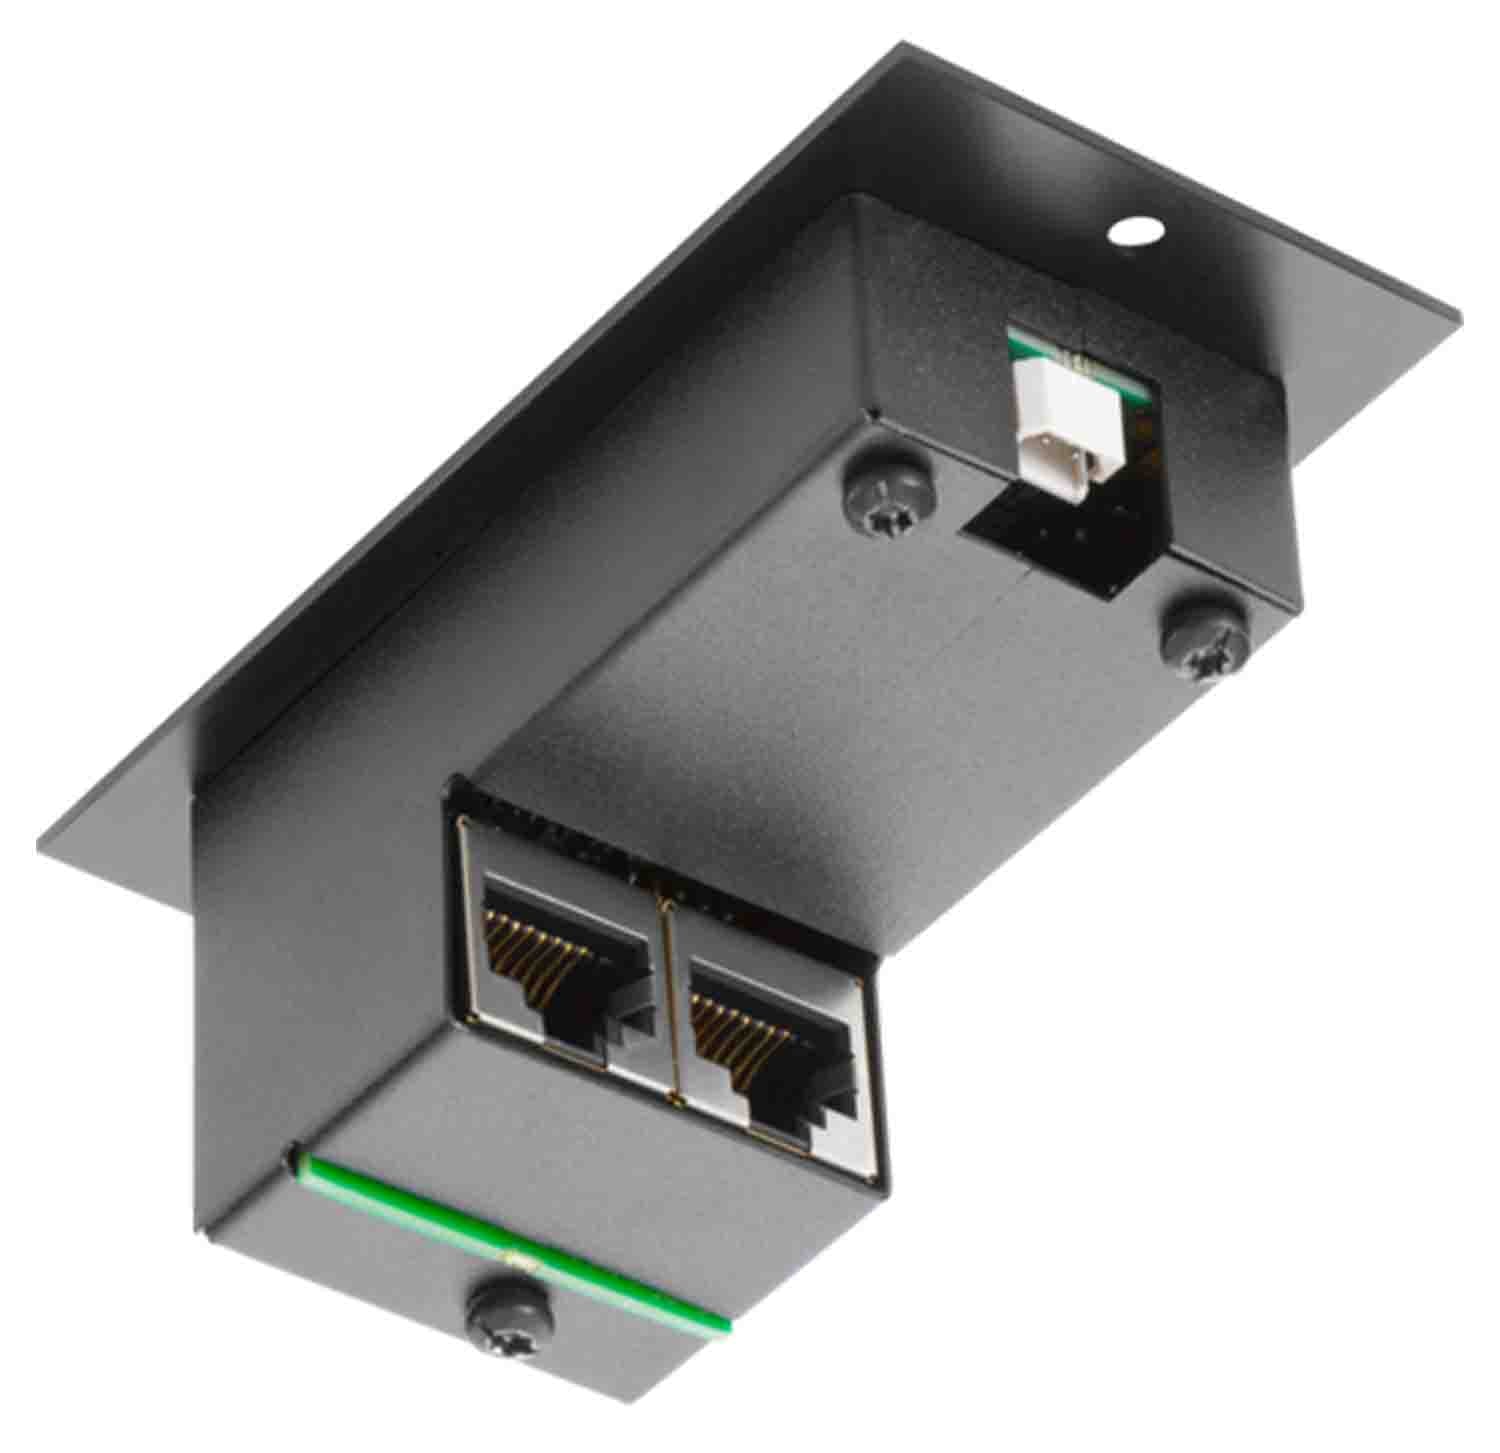 Shure CS 6340 Compact Flush Mounted Channel Selector for Shure Conference Systems - Hollywood DJ